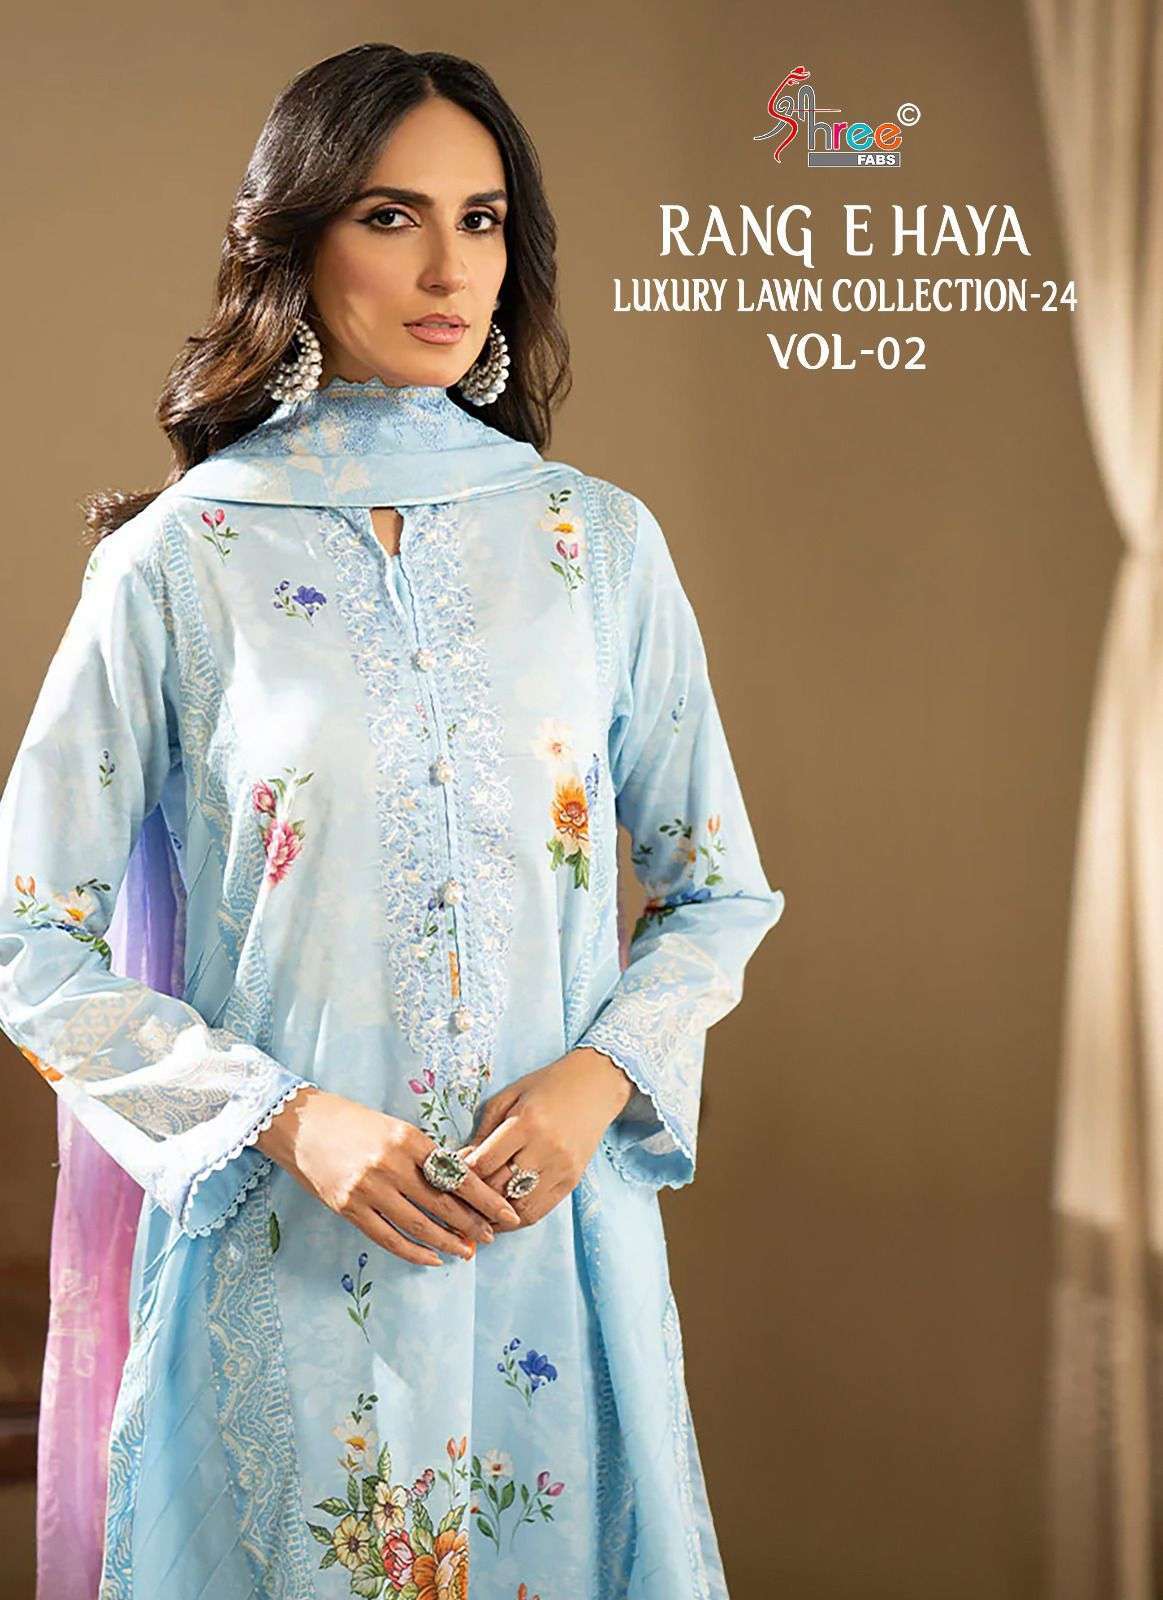 SHREE FABS RANG E HAYA LUXURY LAWN COLLECTION 24 VOL 2 COTTON PAKISTANI COLLECTION WHOLESALER IN SURAT